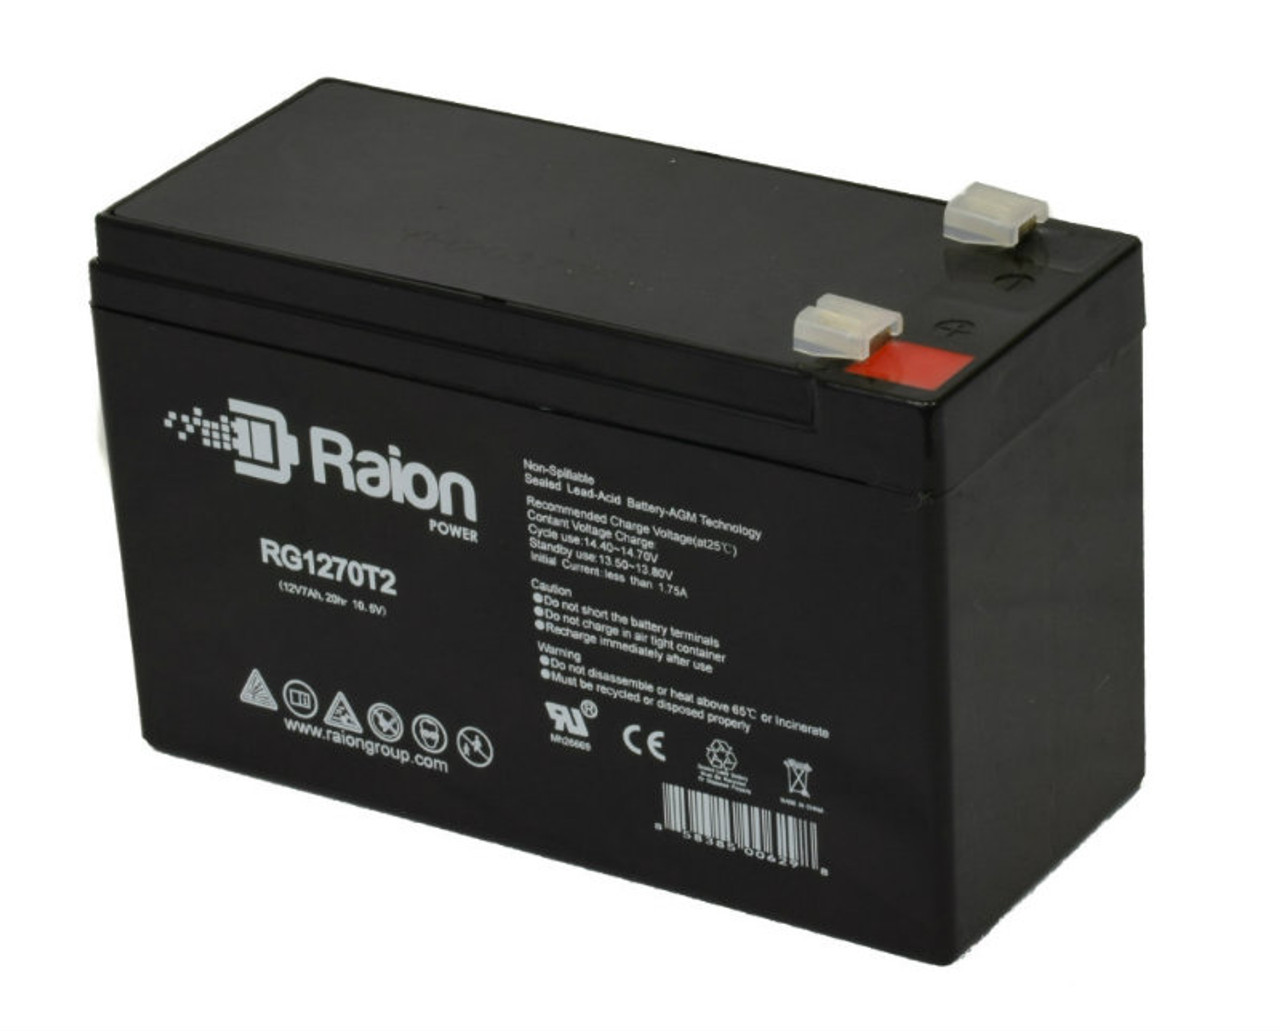 Raion Power RG1270T1 12V 7Ah Non-Spillable Replacement Battery for Sunlight SPA 12-7 1